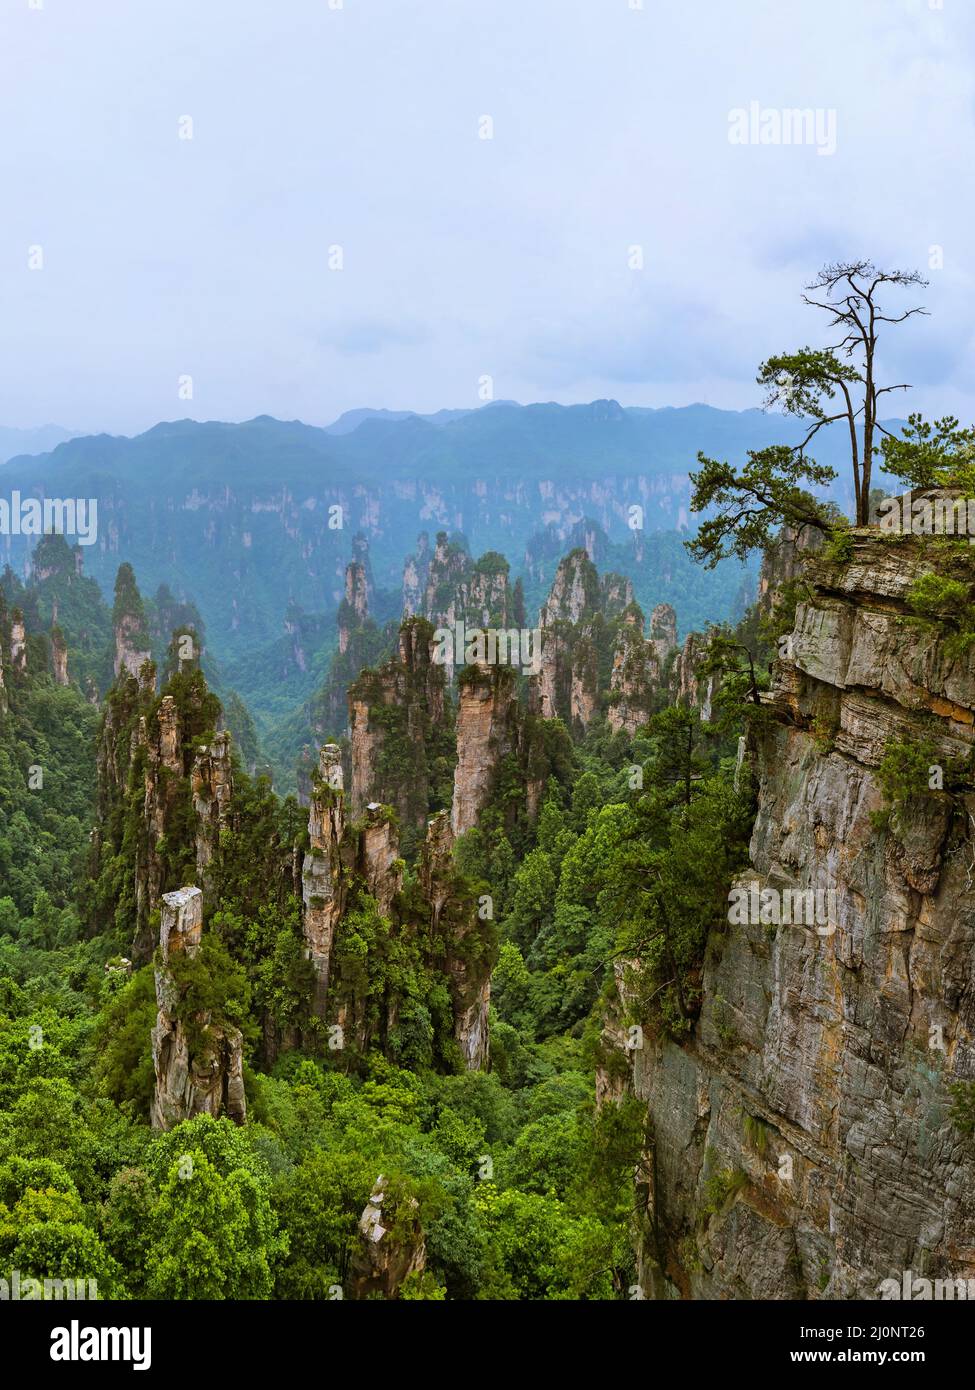 7 JawDropping Images of China That Looks Exactly like the Avatar Film   The ASEAN Post